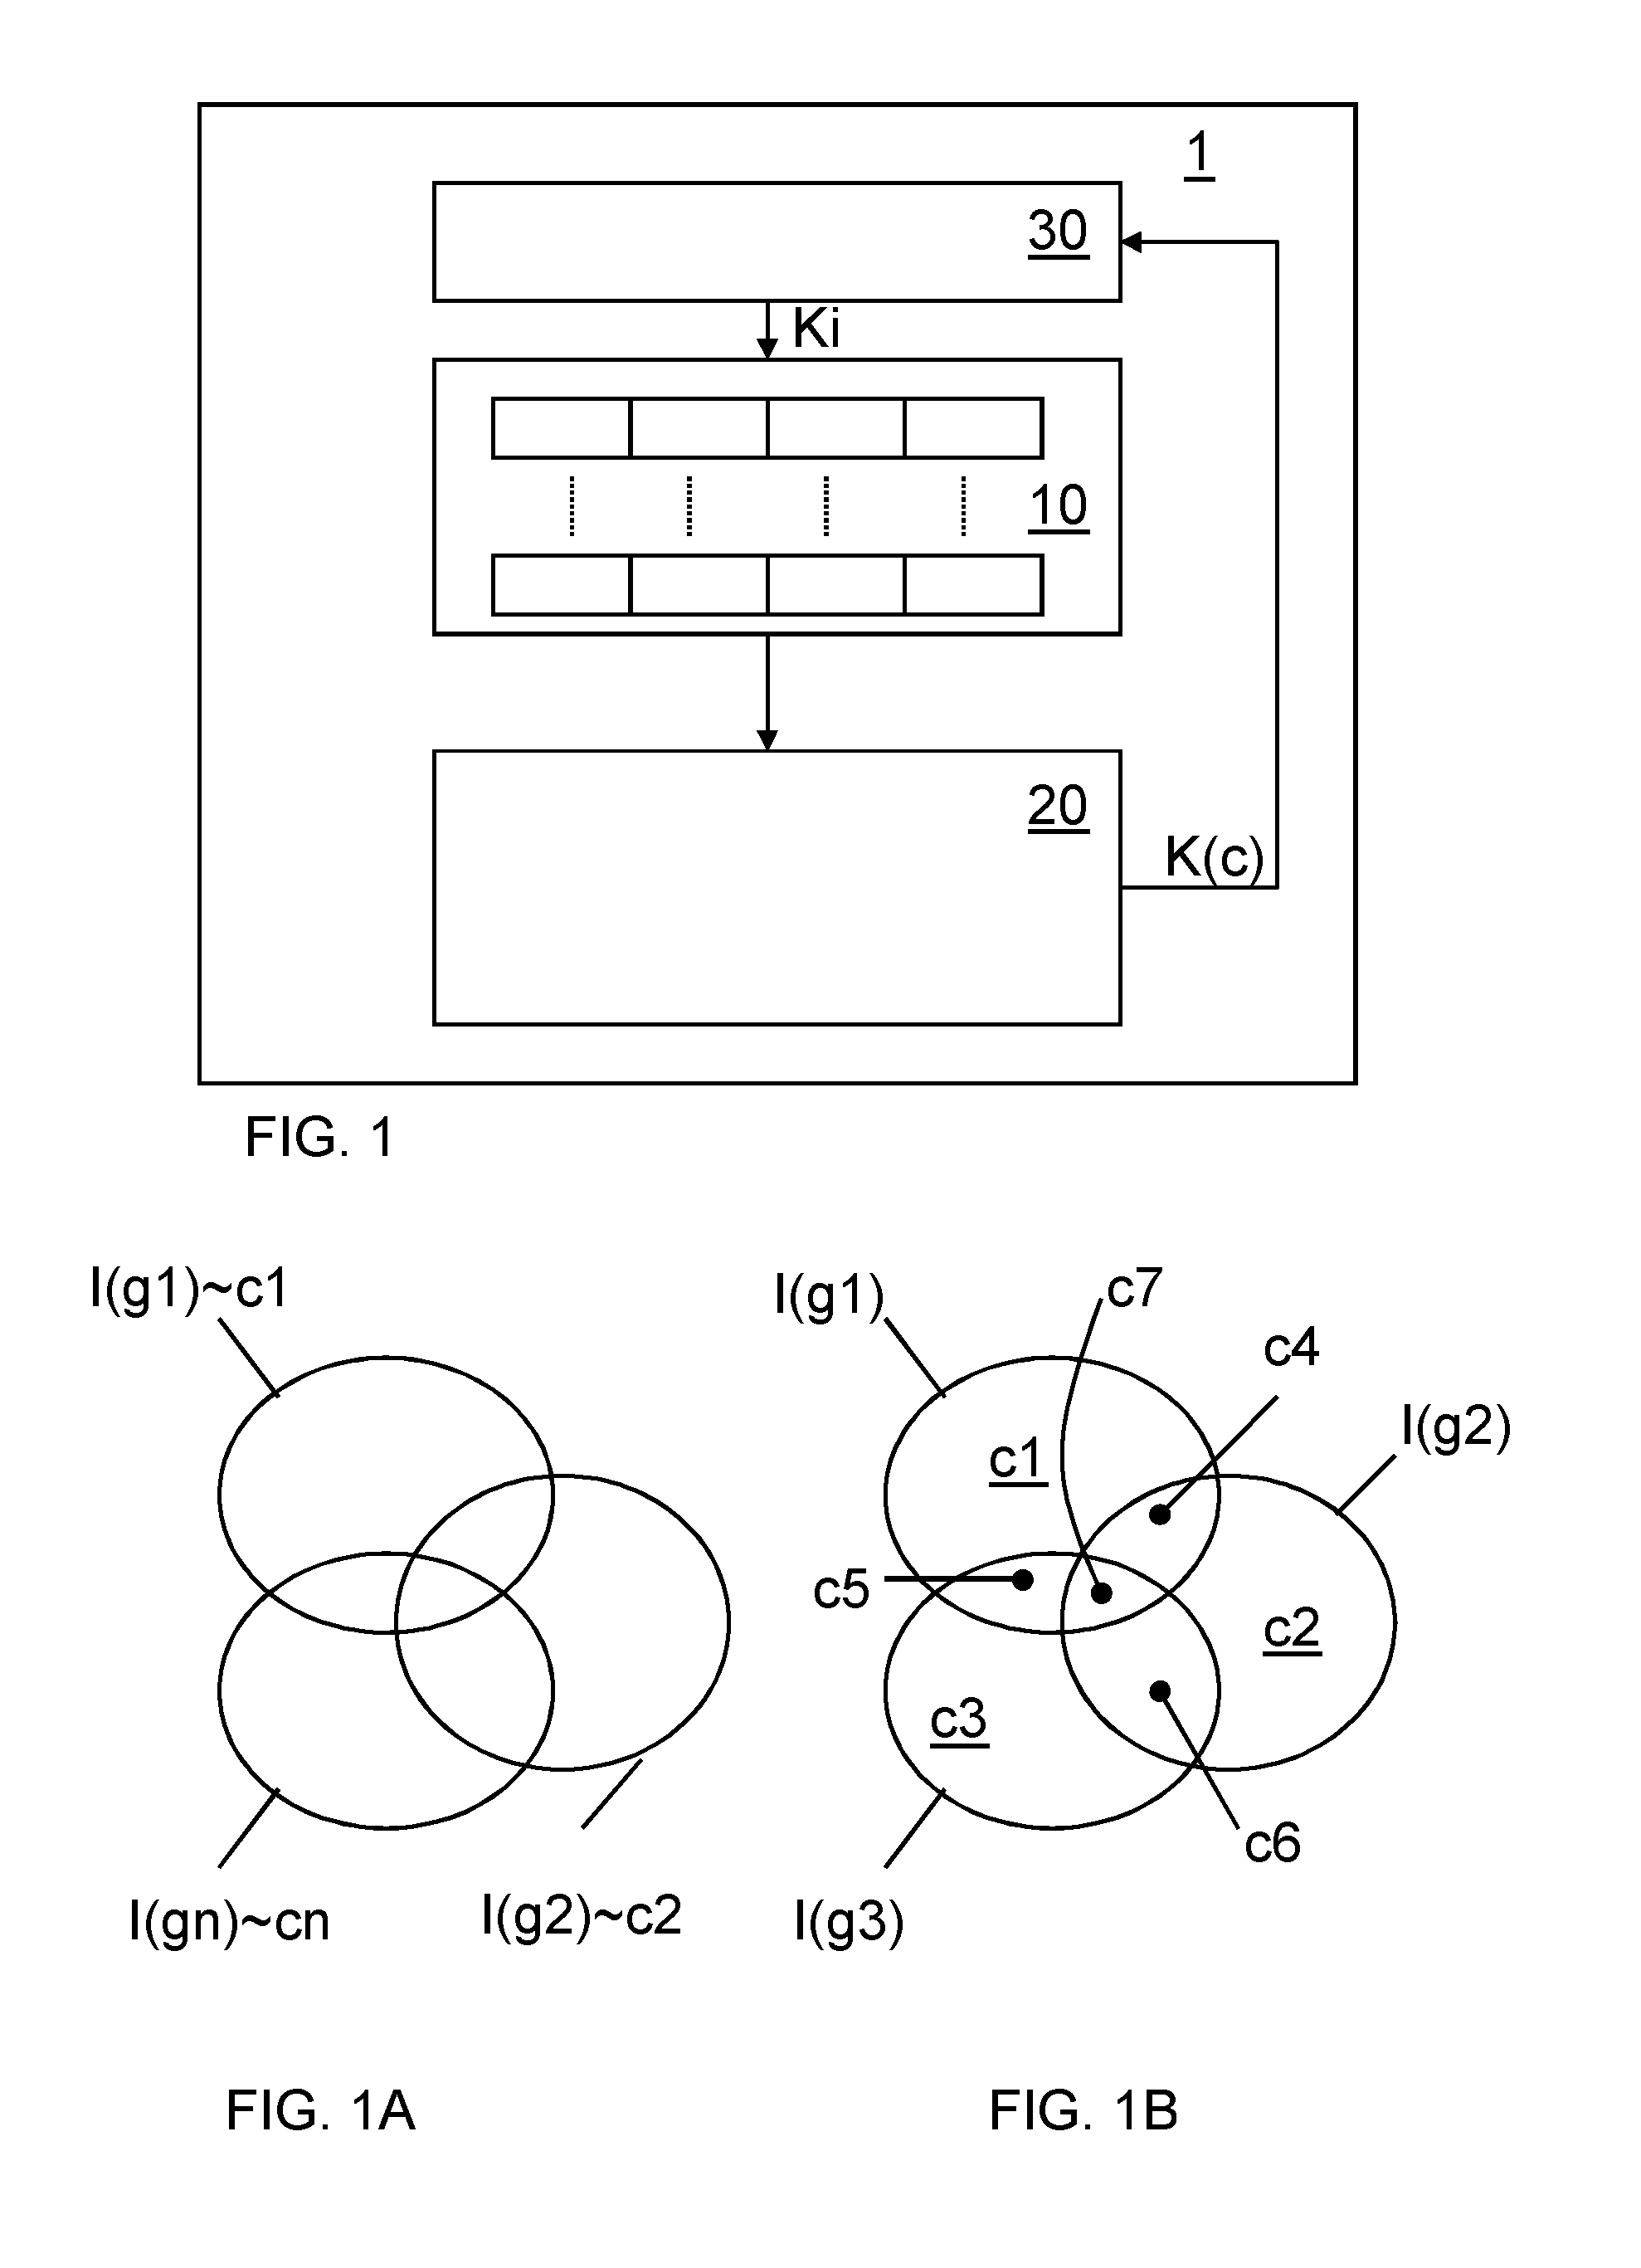 System and method for searching a labeled predominantly non-textual item